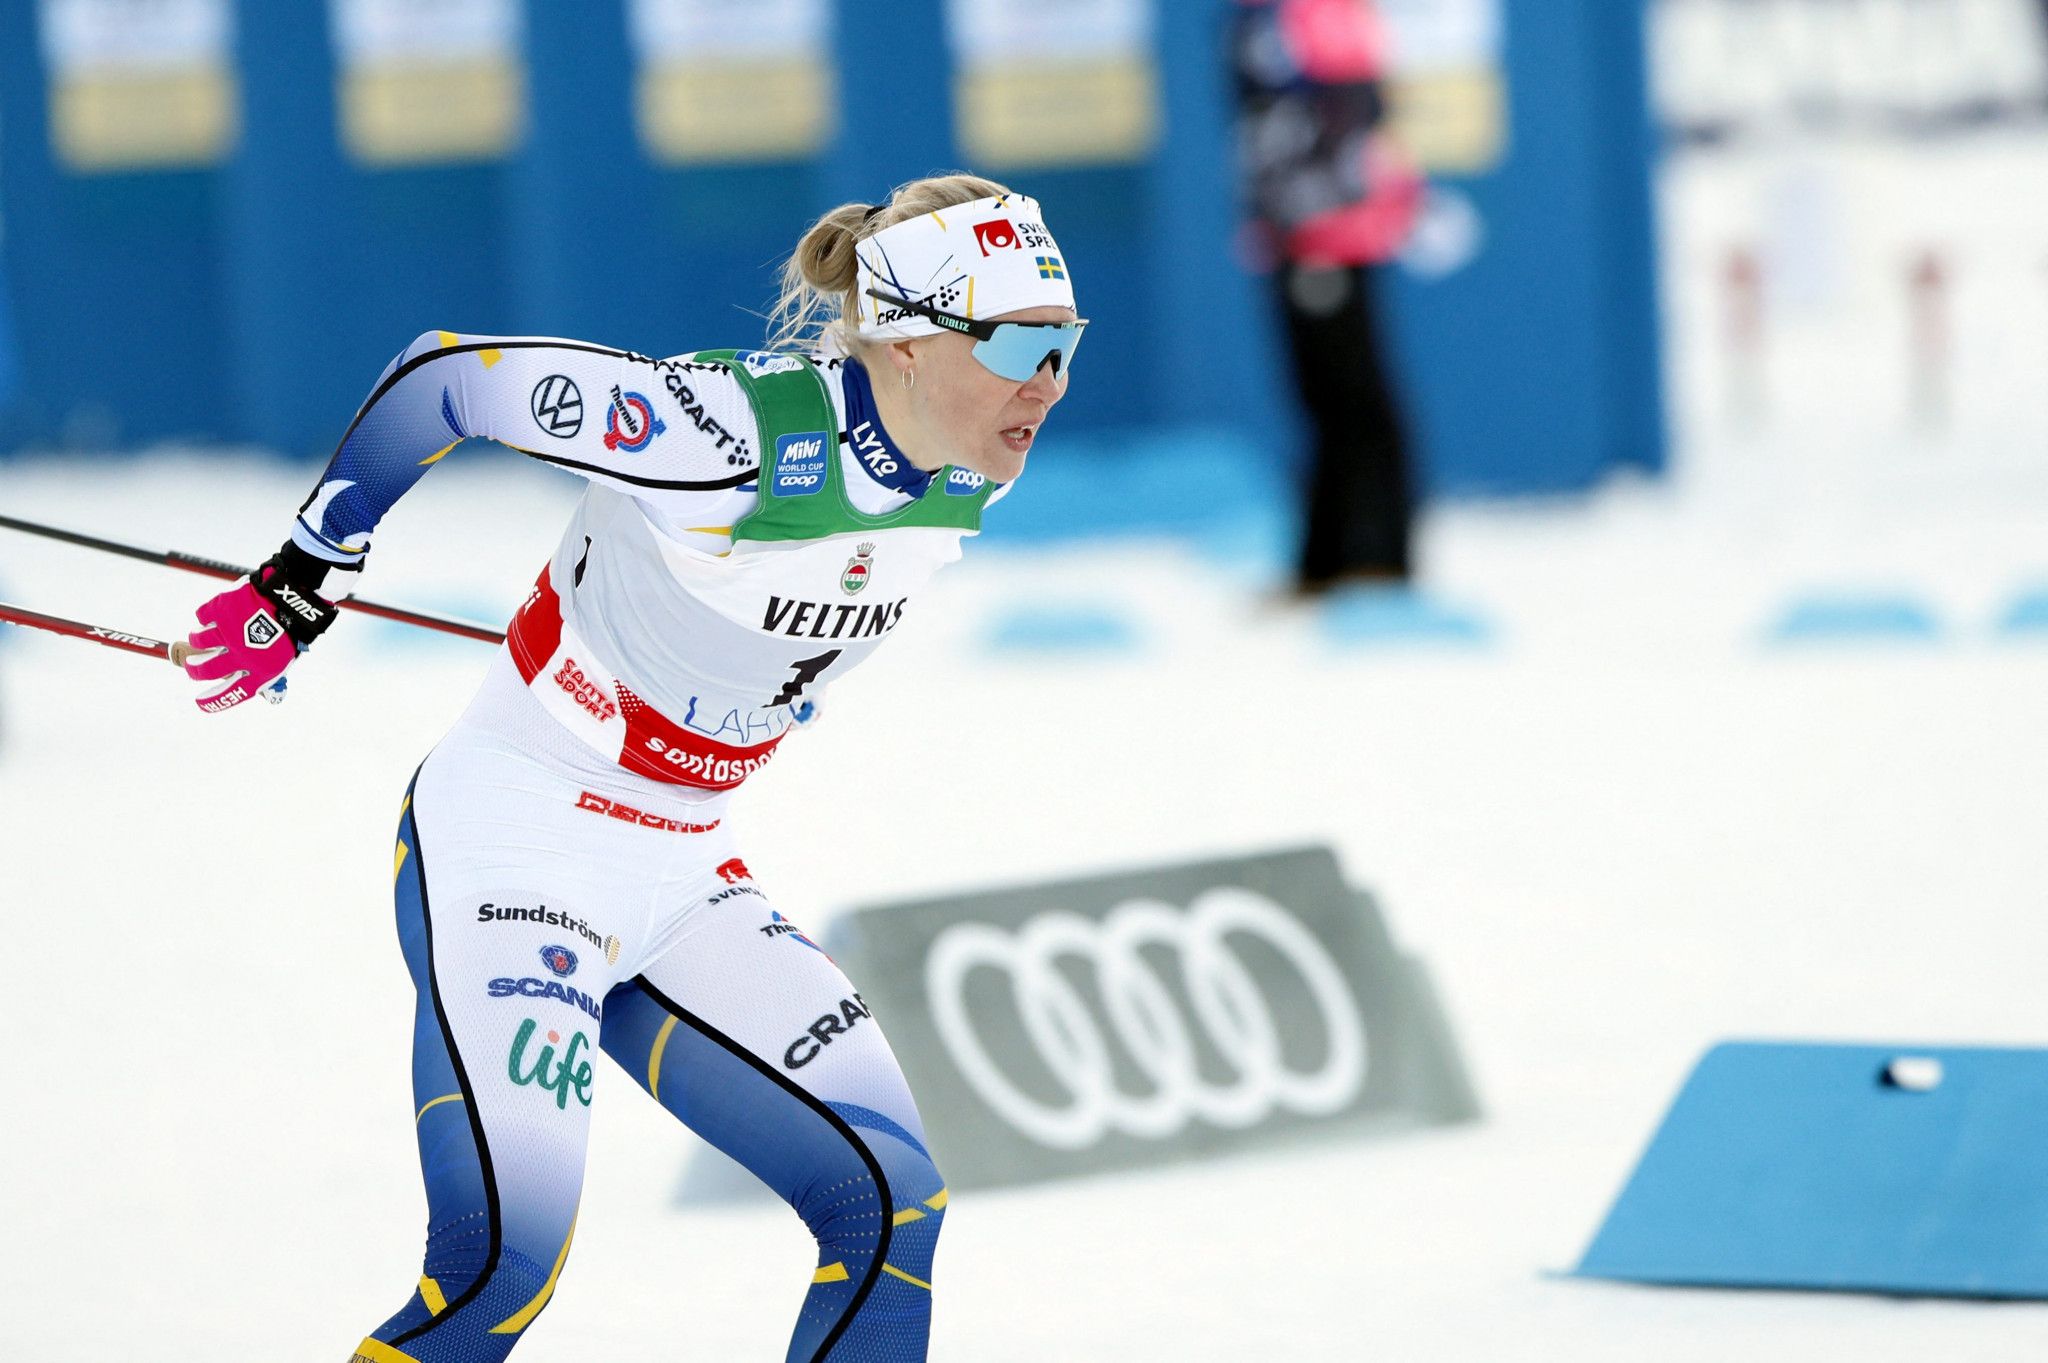 Jonna Sundling won the mixed relay gold with Calle Halfvarsson today in Falun ©Getty Images